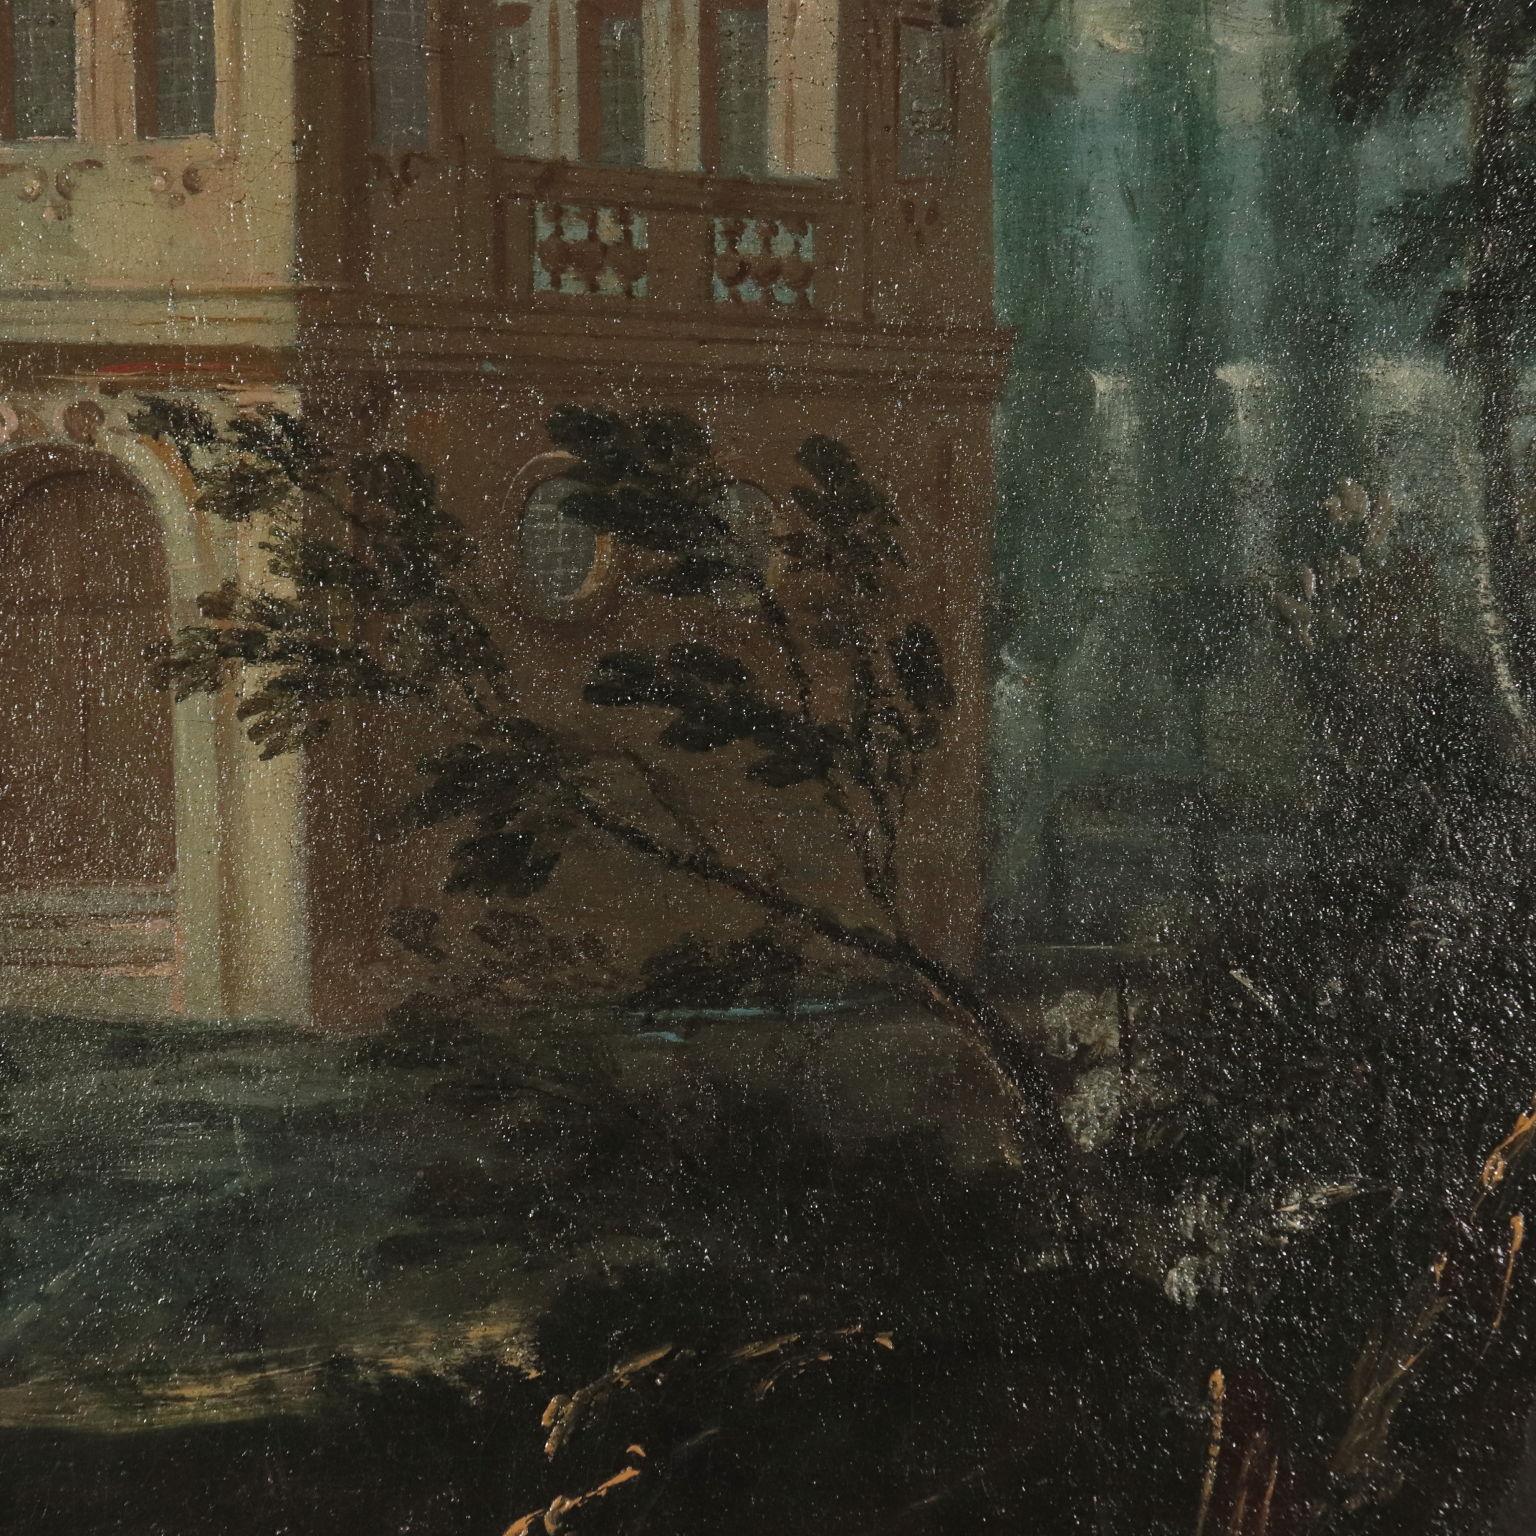 Landscape with Architecture and Figure, 18th Century. Allegory of Life in a Vill 2